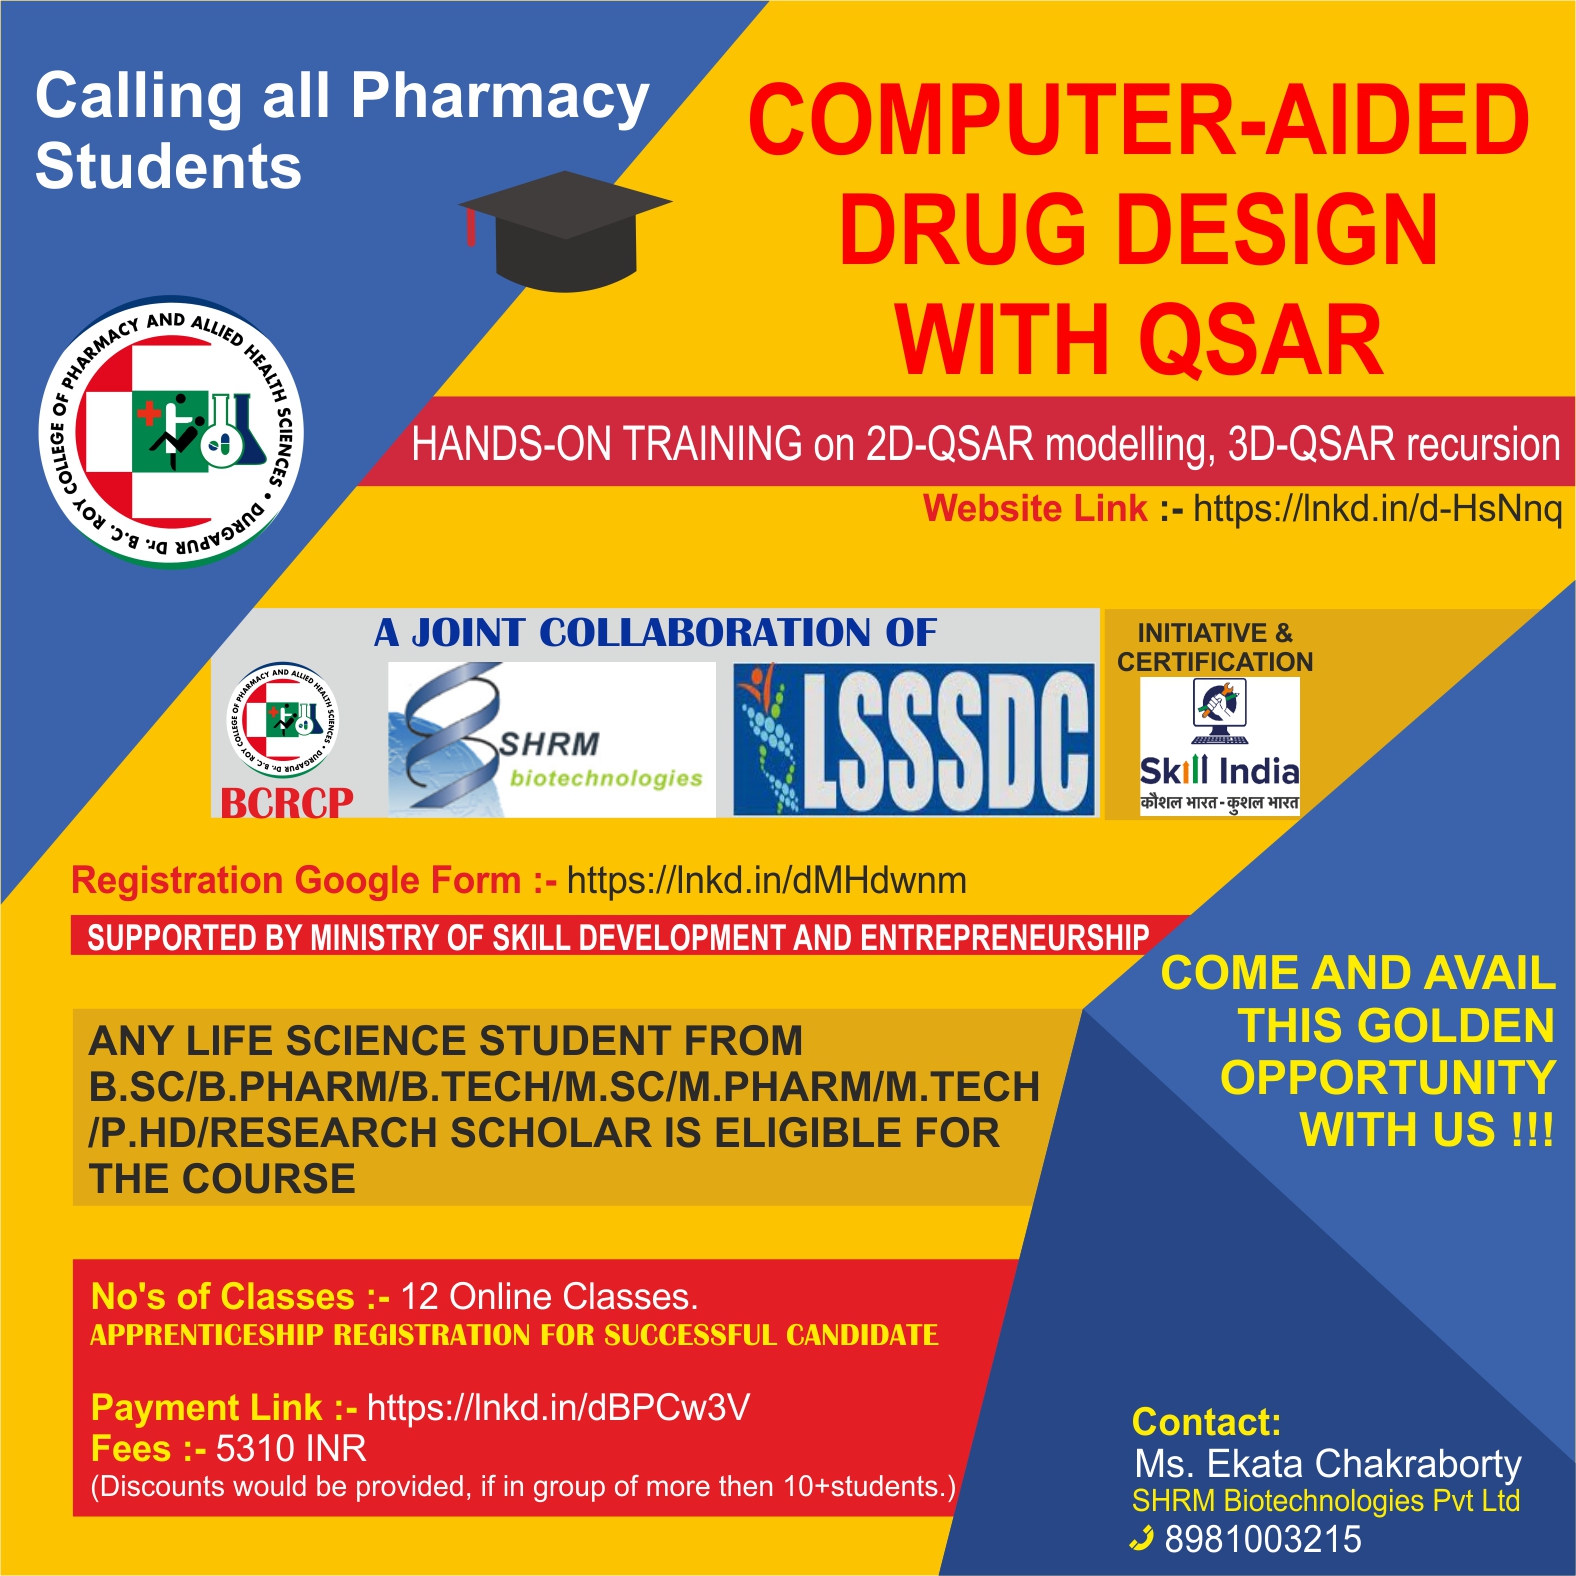 COMPUTER-AIDED  DRUG DESIGN  WITH QSAR